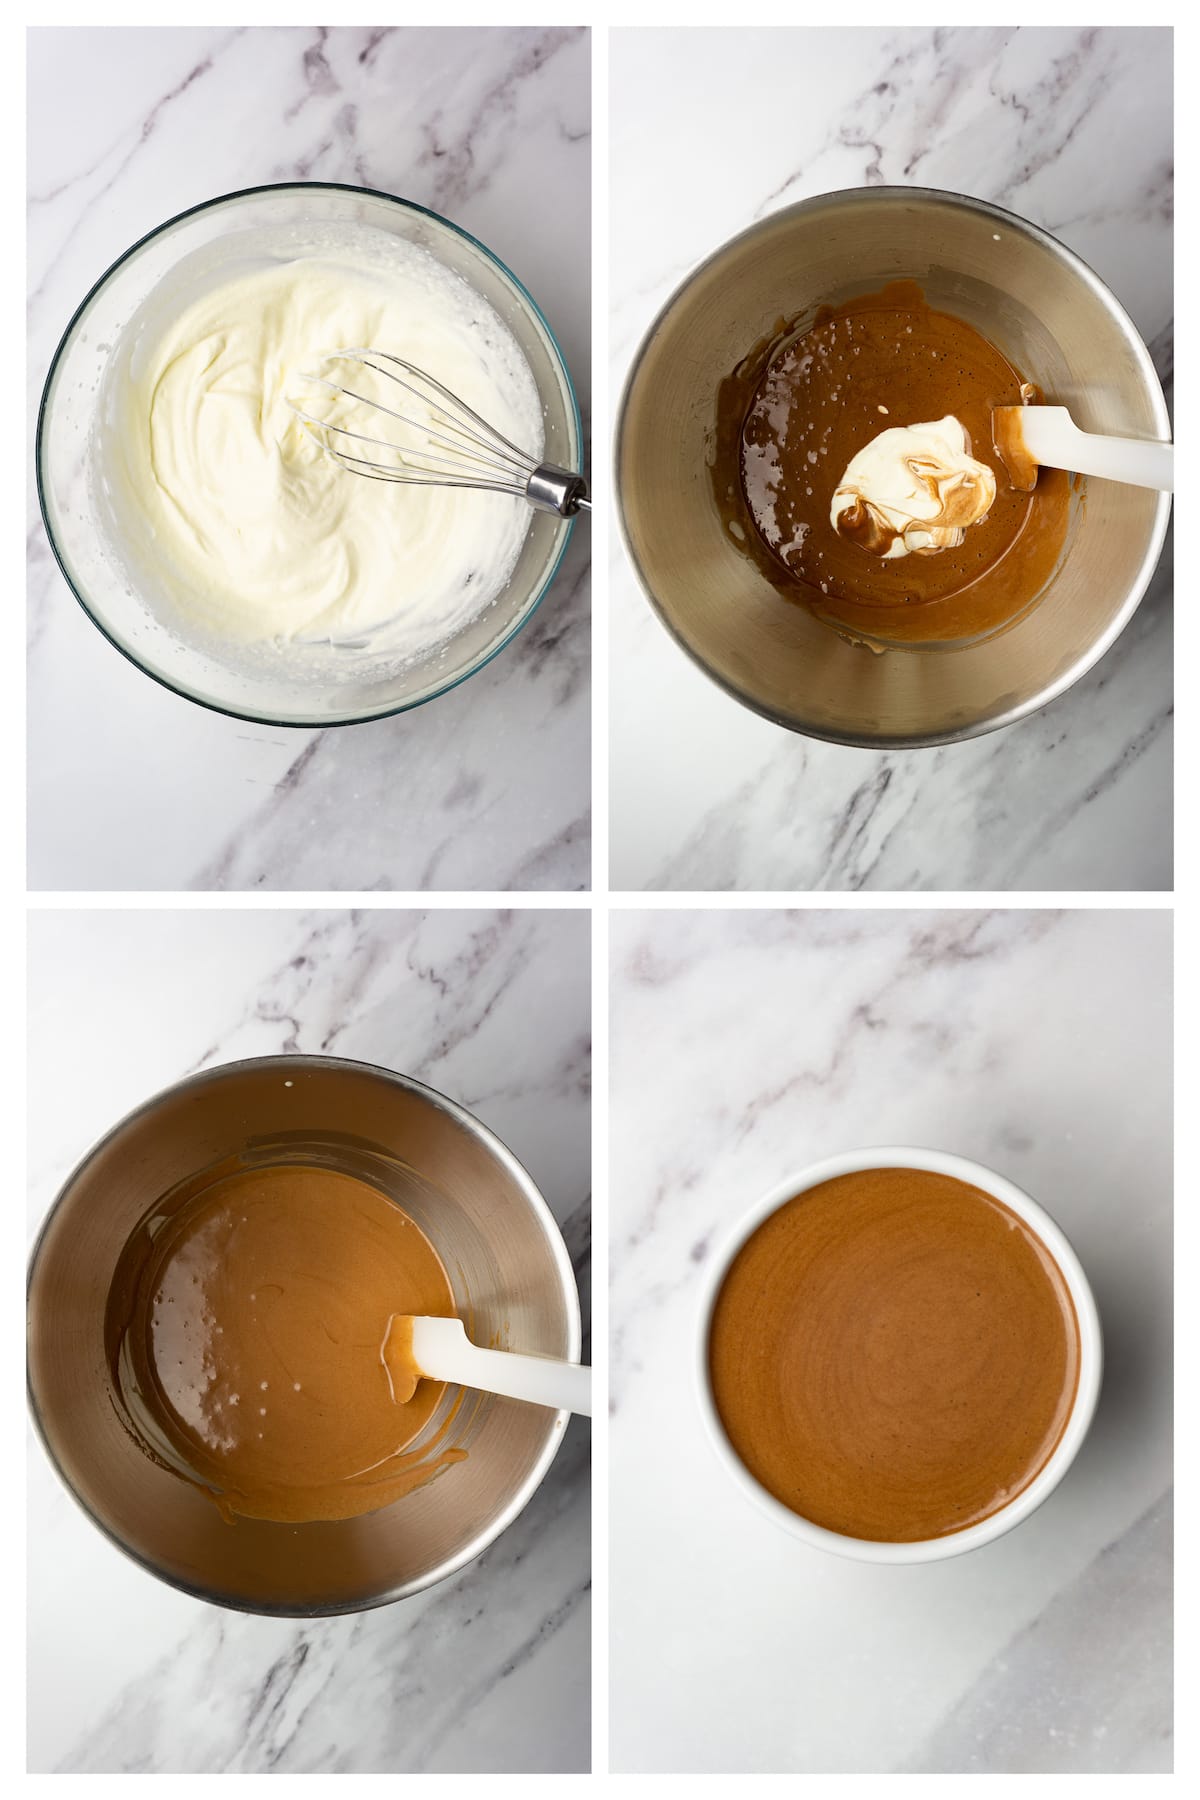 Collage image showing how to make dark chocolate mousse.